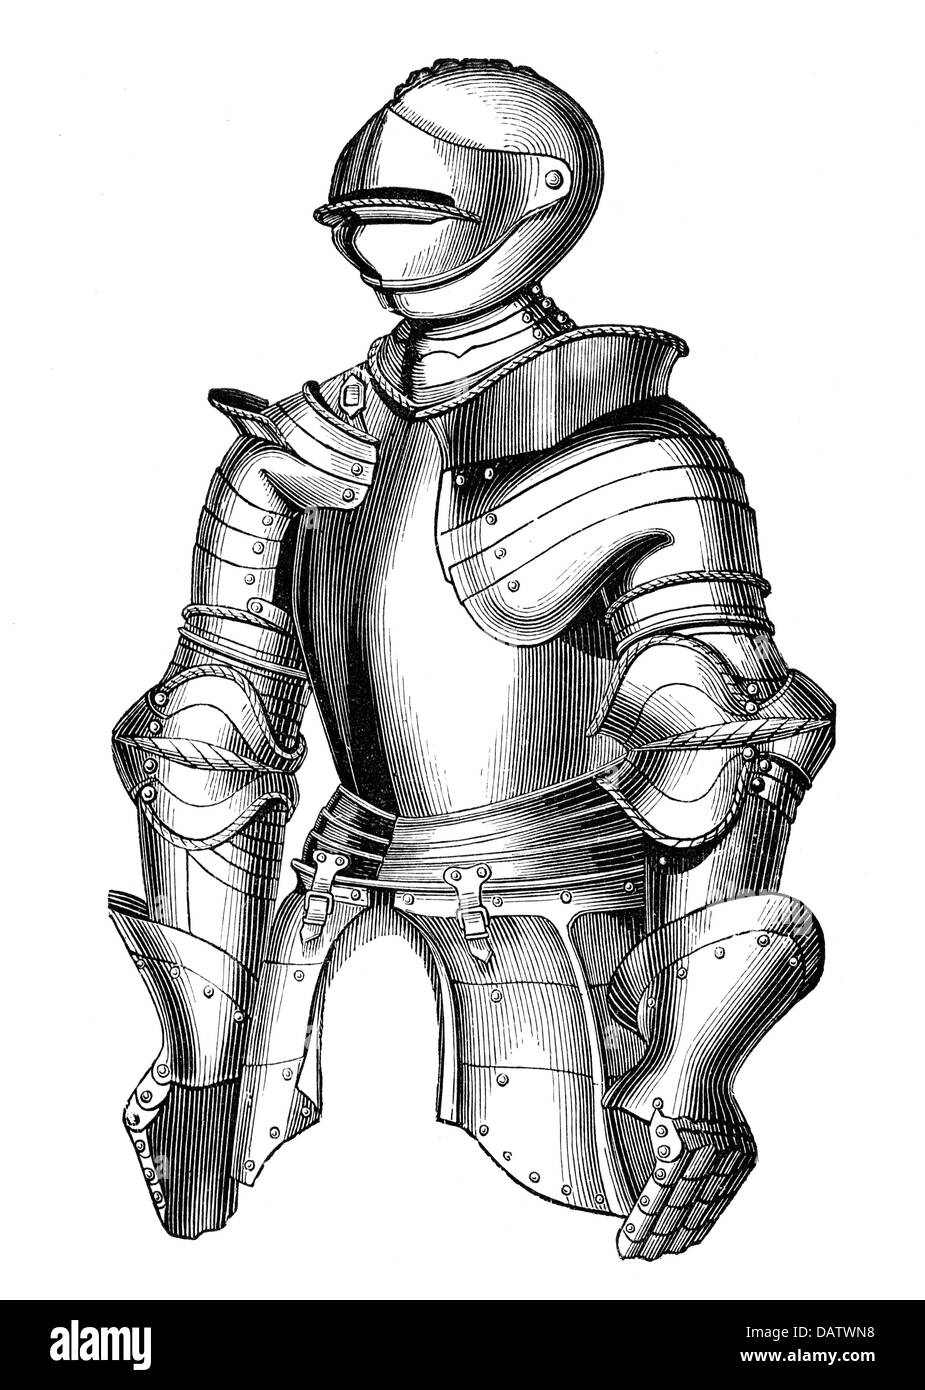 military, Middle Ages, armour, Maximilian plate armour, circa 1460, Additional-Rights-Clearences-Not Available Stock Photo